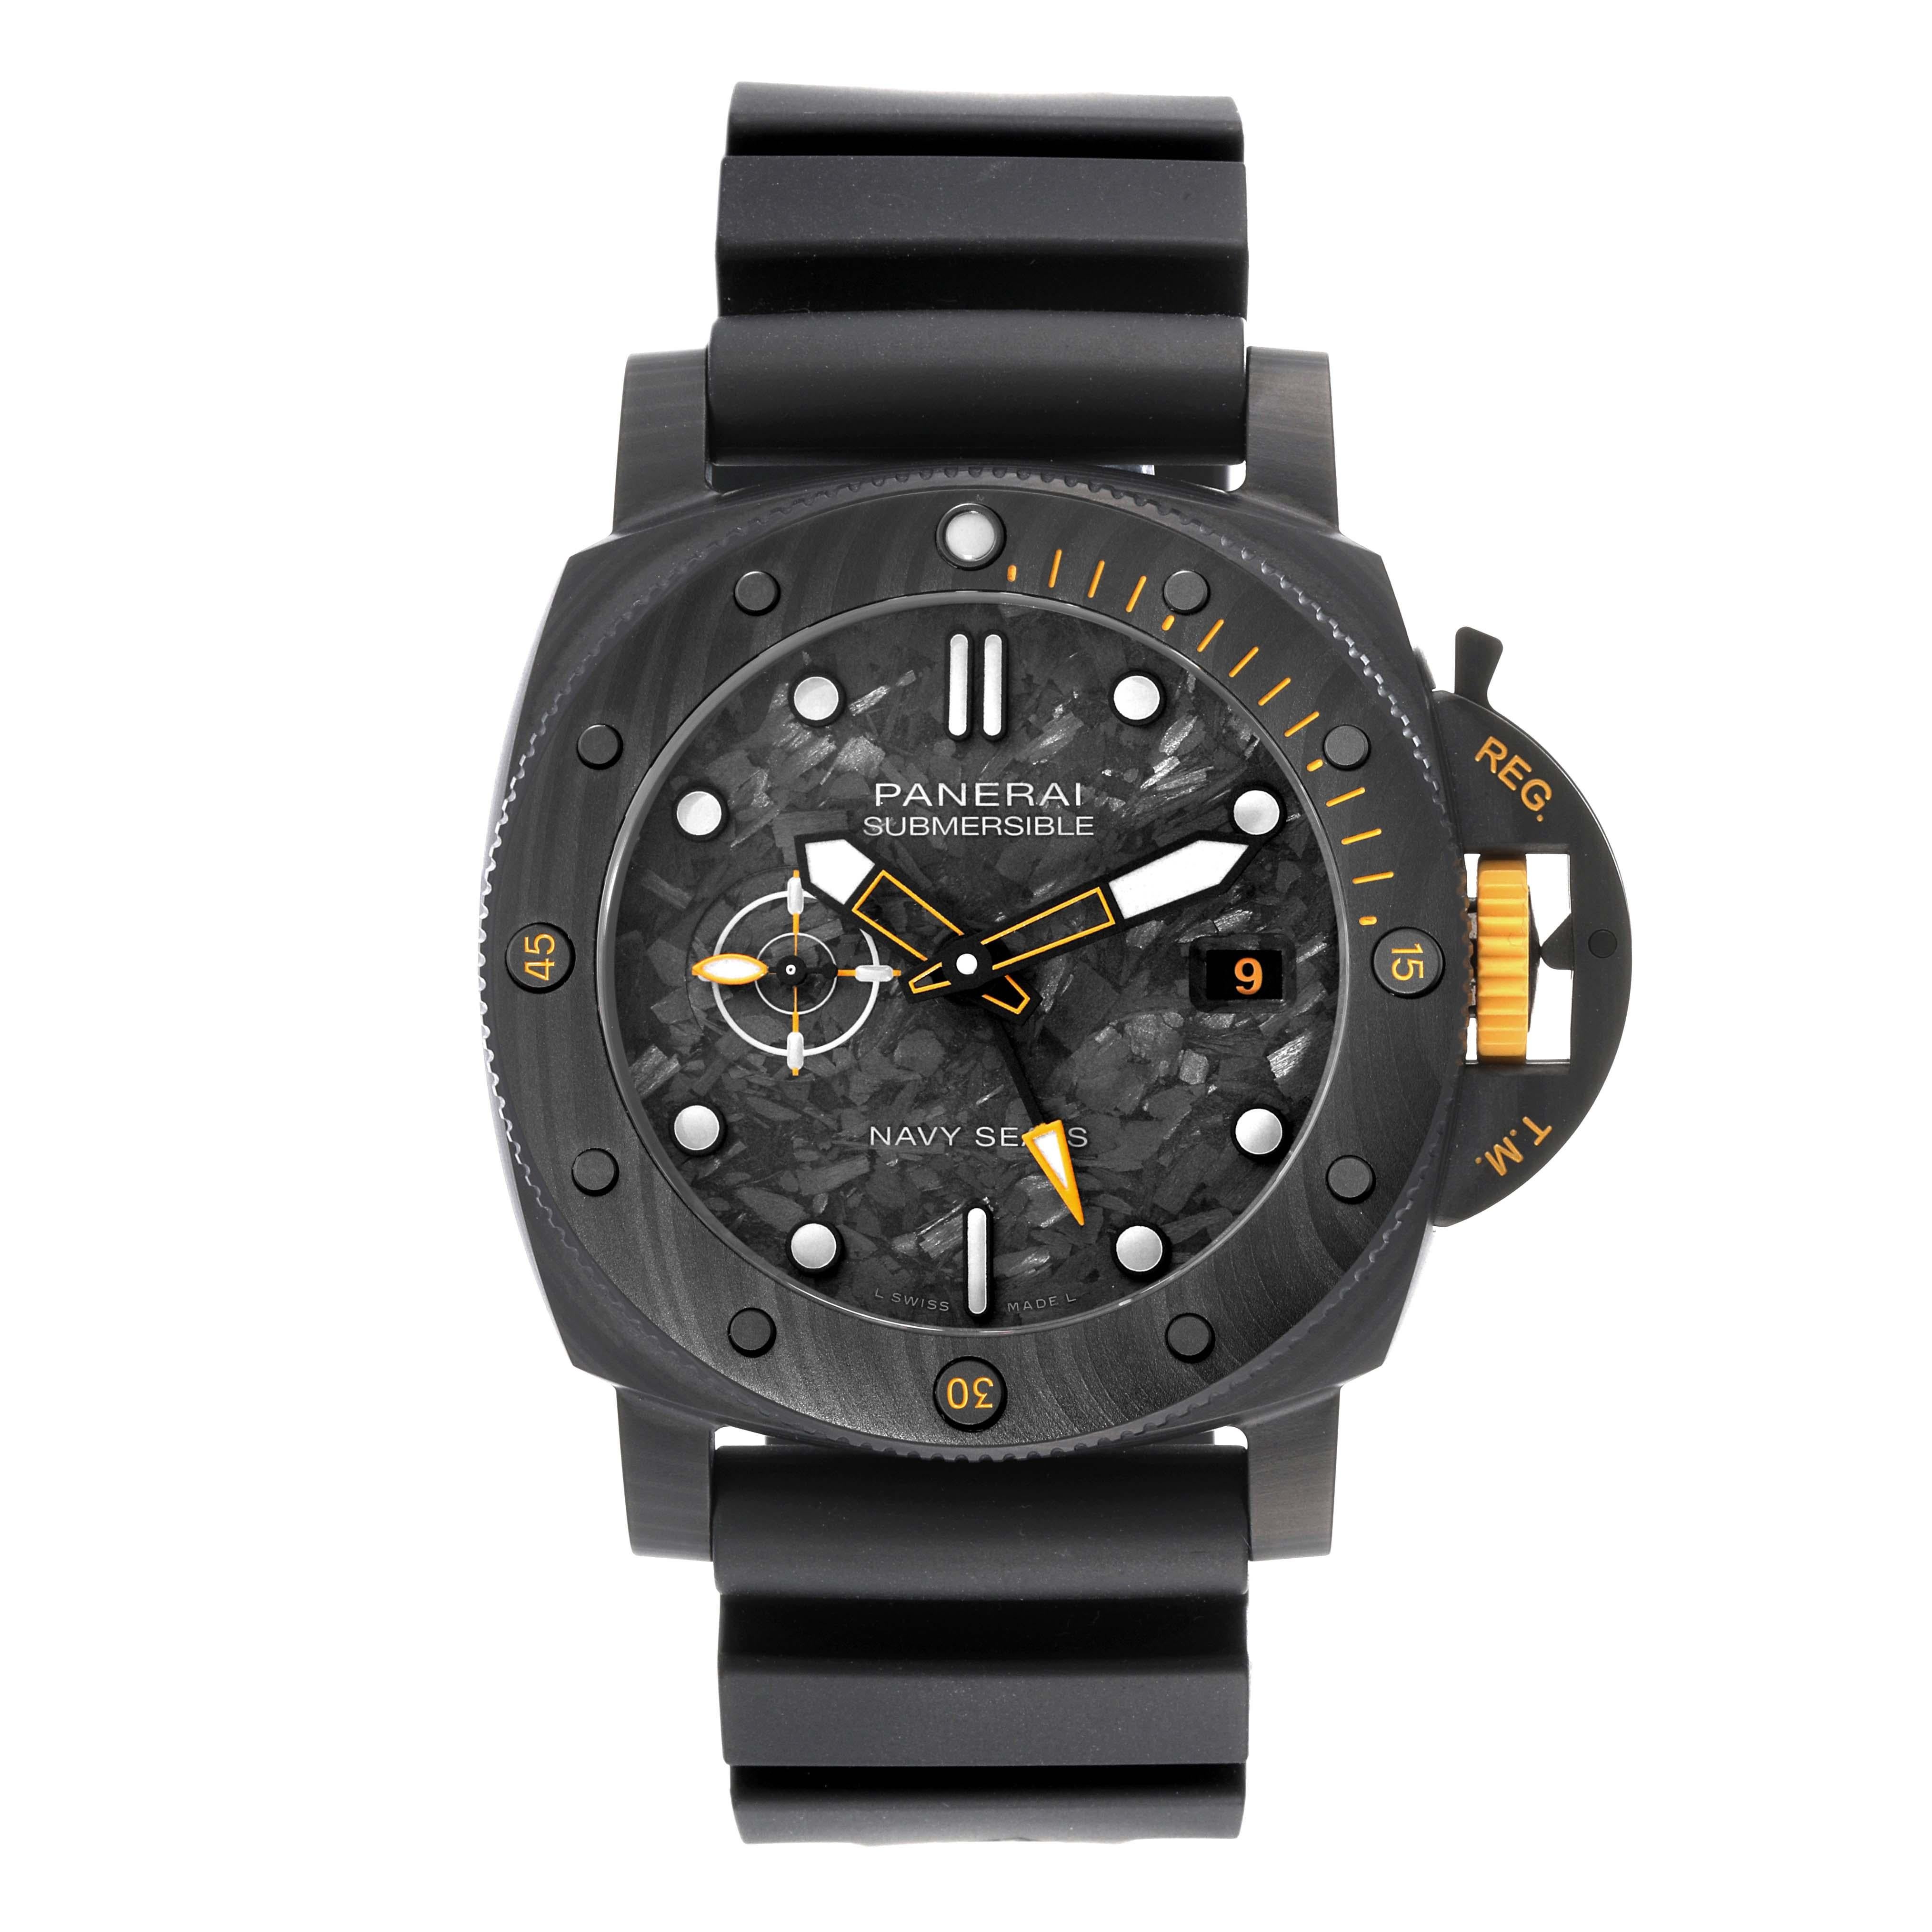 Panerai Submersible GMT Navy Seals LE Carbotech Mens Watch PAM01324 Box Card. Automatic self-winding movement. Two part cushion shaped black carbotech case 44.0 mm in diameter. Brushed titanium caseback Panerai patented crown protector. Yellow